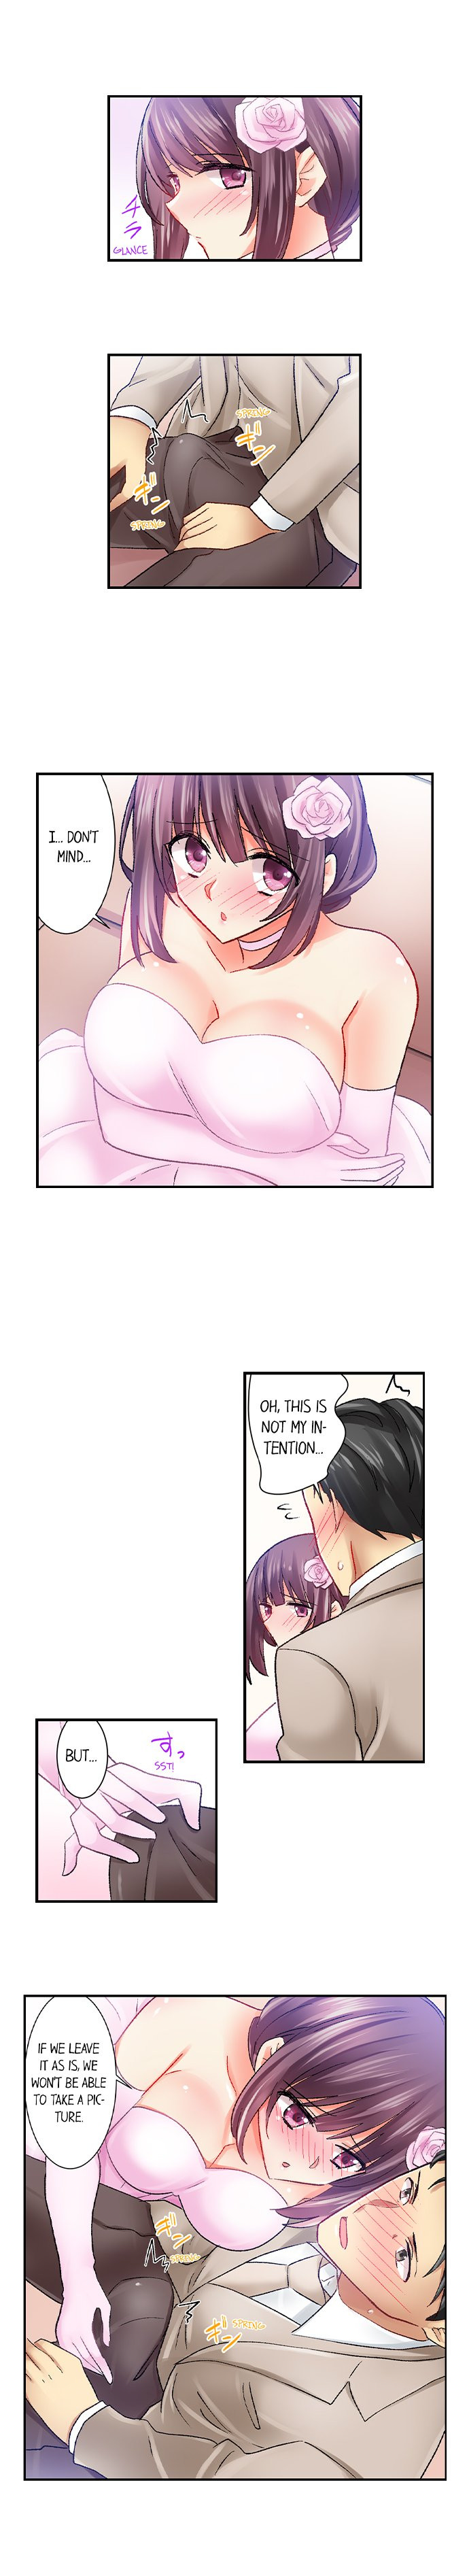 Our Kinky Newlywed Life Chapter 53 - Page 3